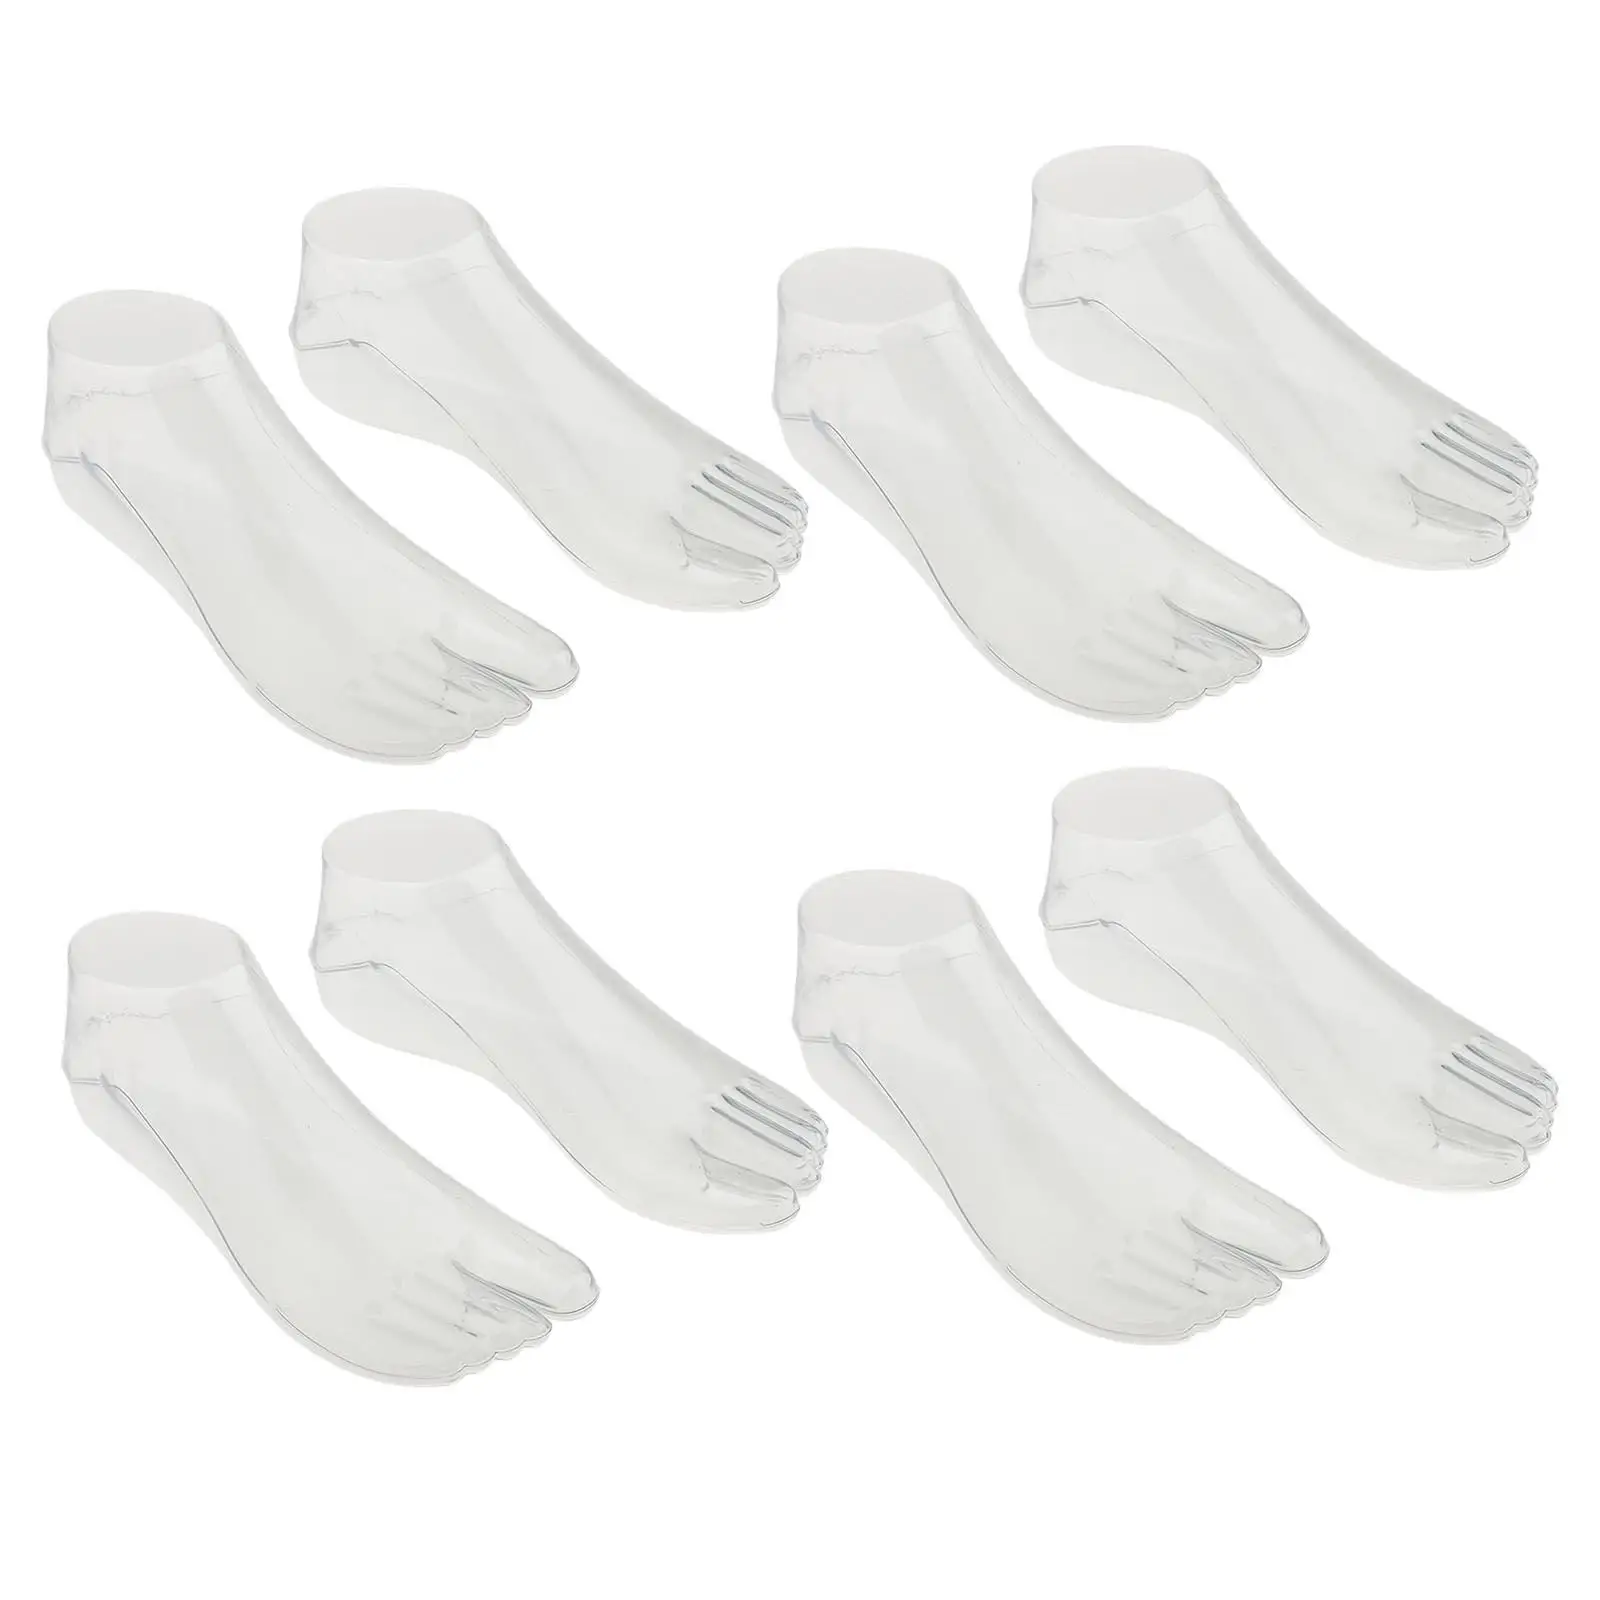 New 4Pair    Shoes Socks Jewelry Foot Ring Anckle Chain Retail  Model - Clear/ Nude/ White